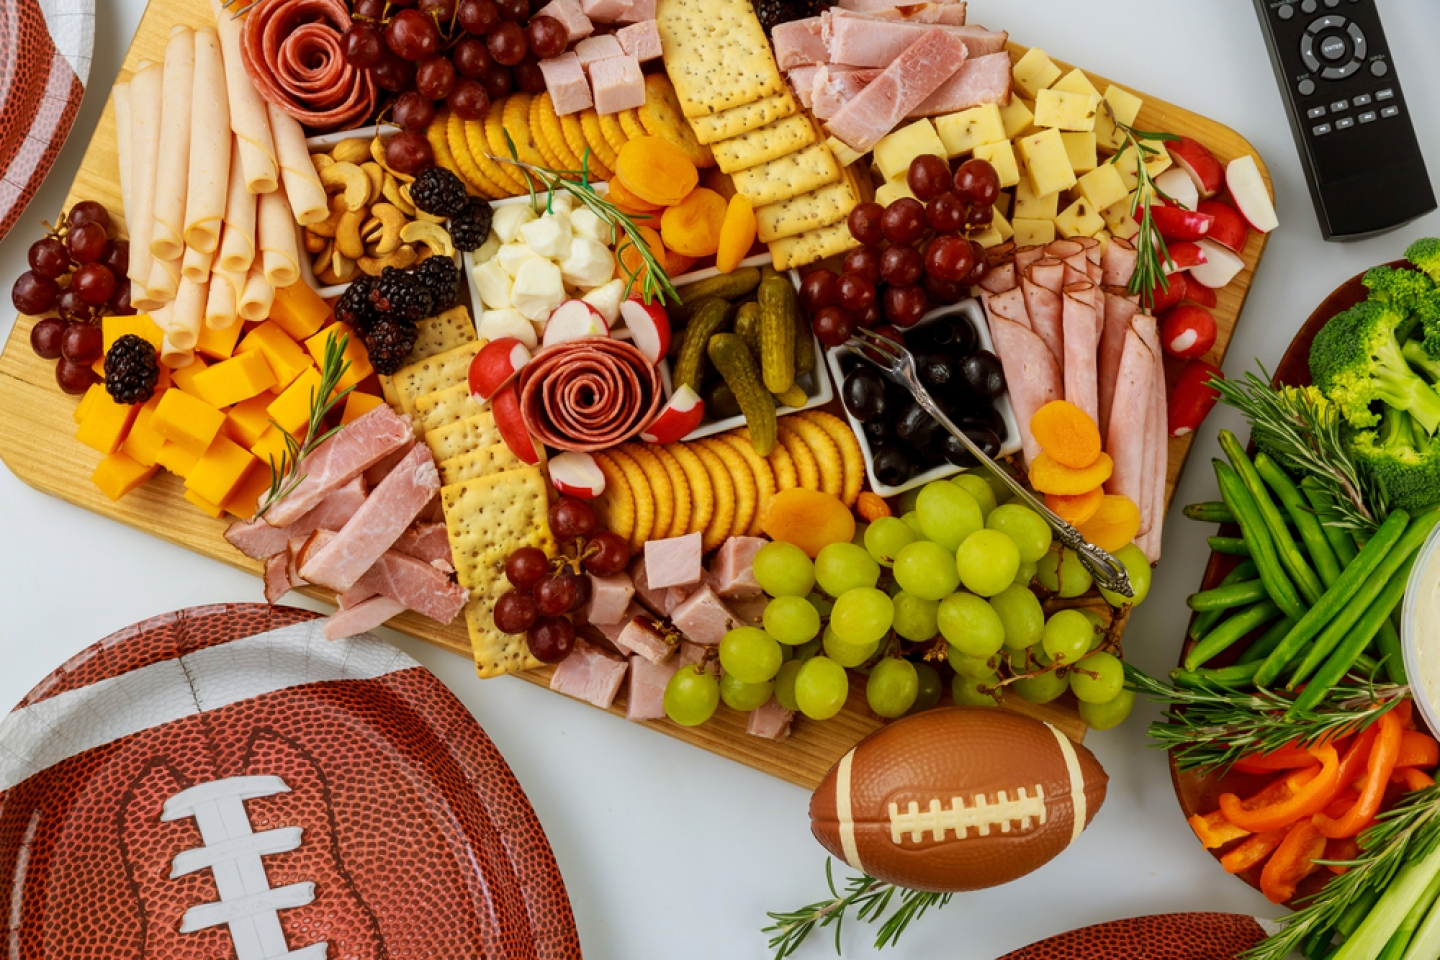 Delicious food for american football game party with remote control for watching sport on tv channel.